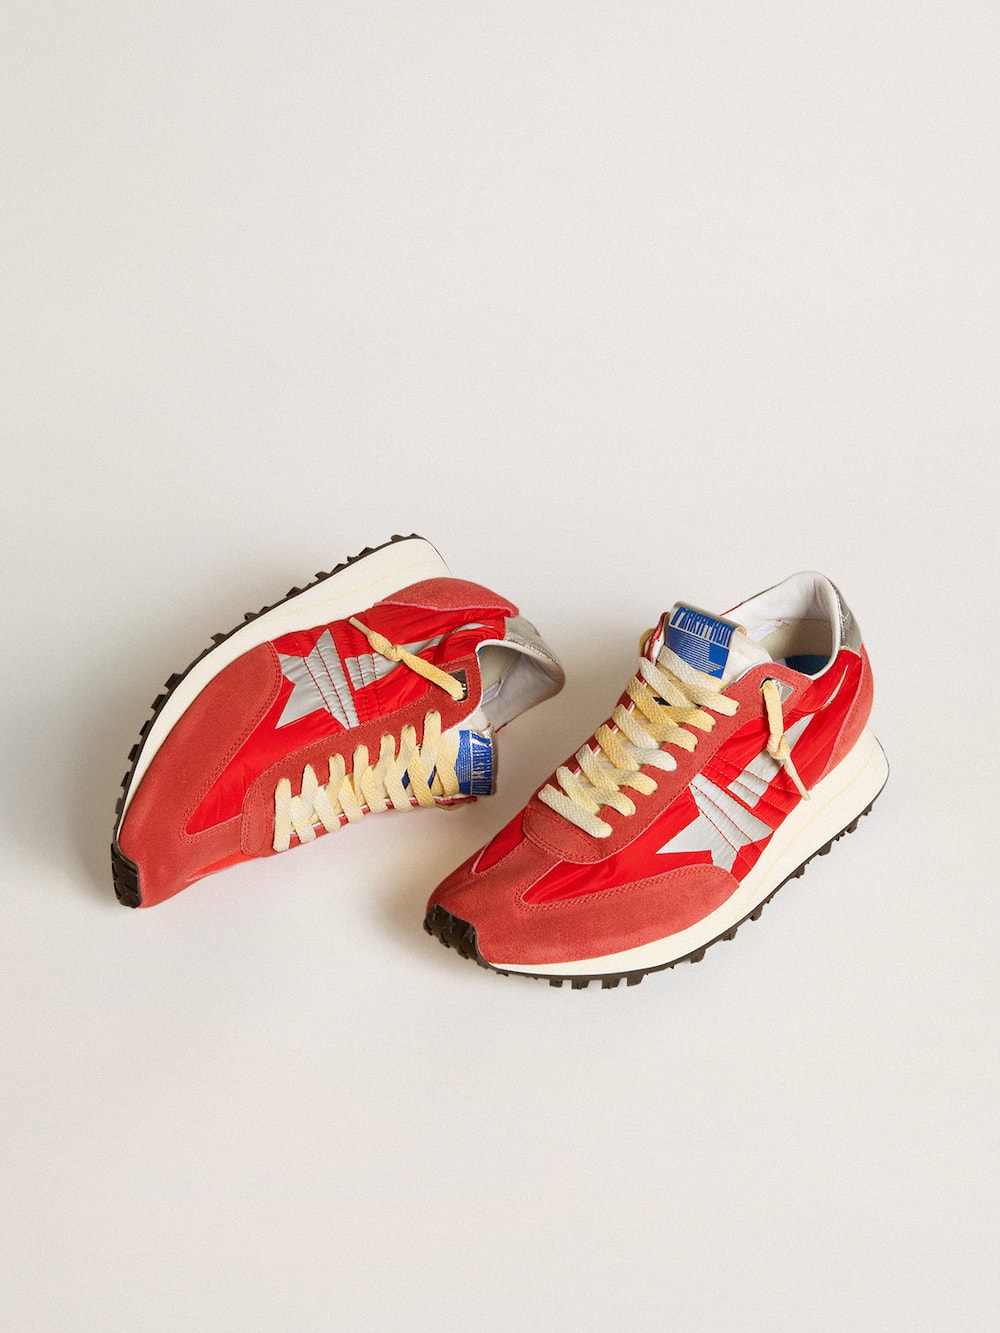 Golden Goose - Men’s Marathon with red nylon upper and silver star in 